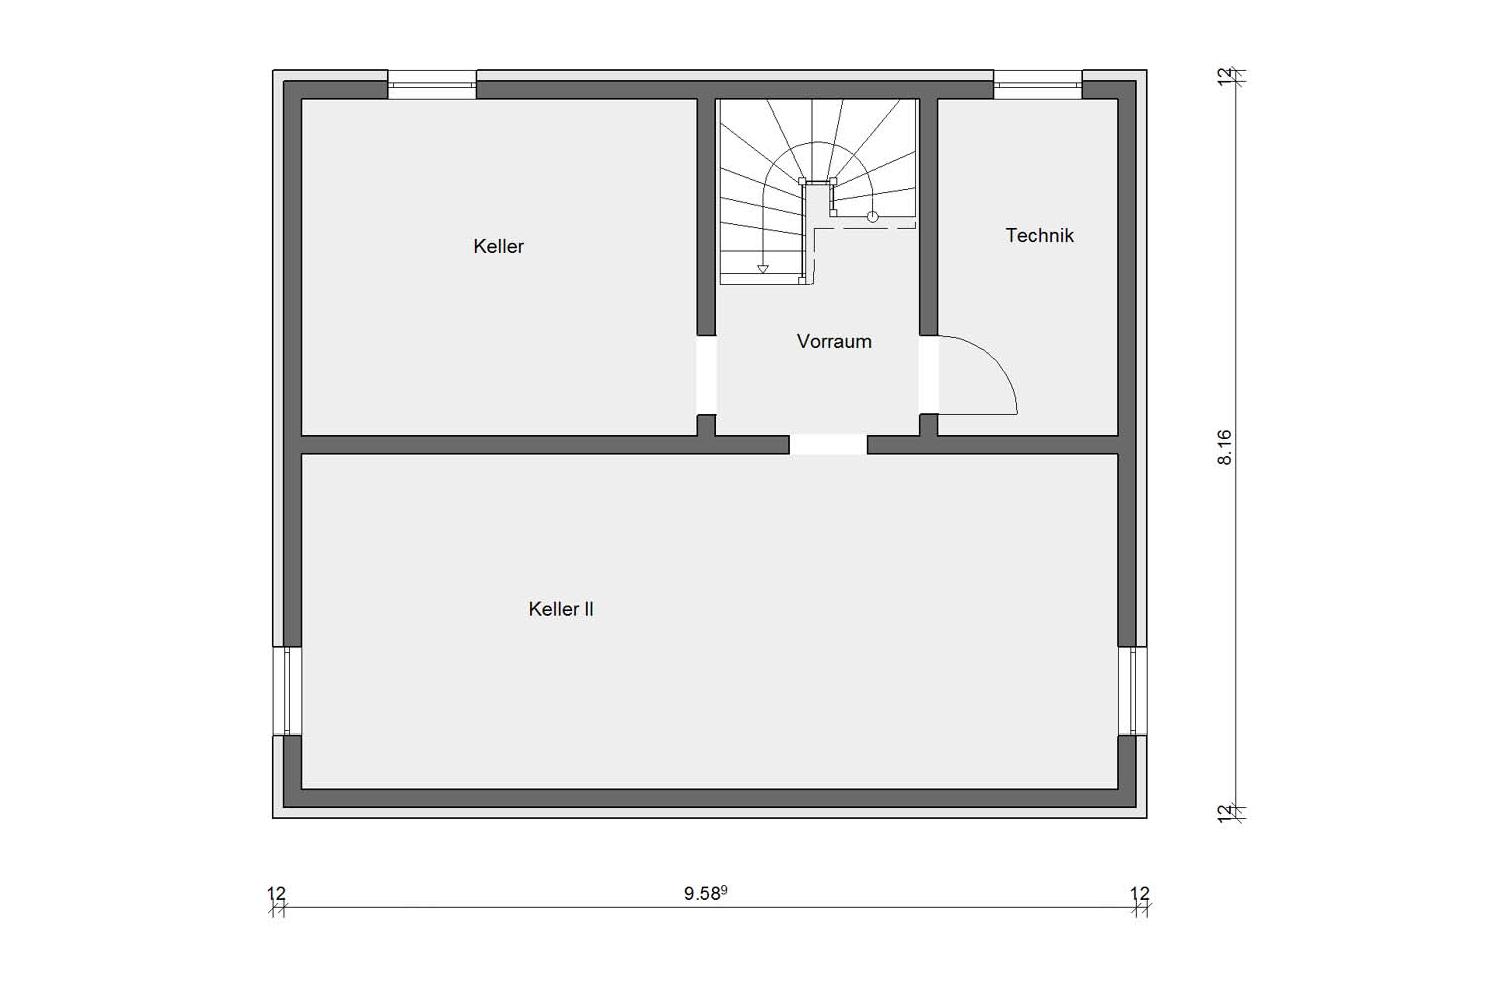 Floor plan basement E 15-137.4 Detached house with pitched roof